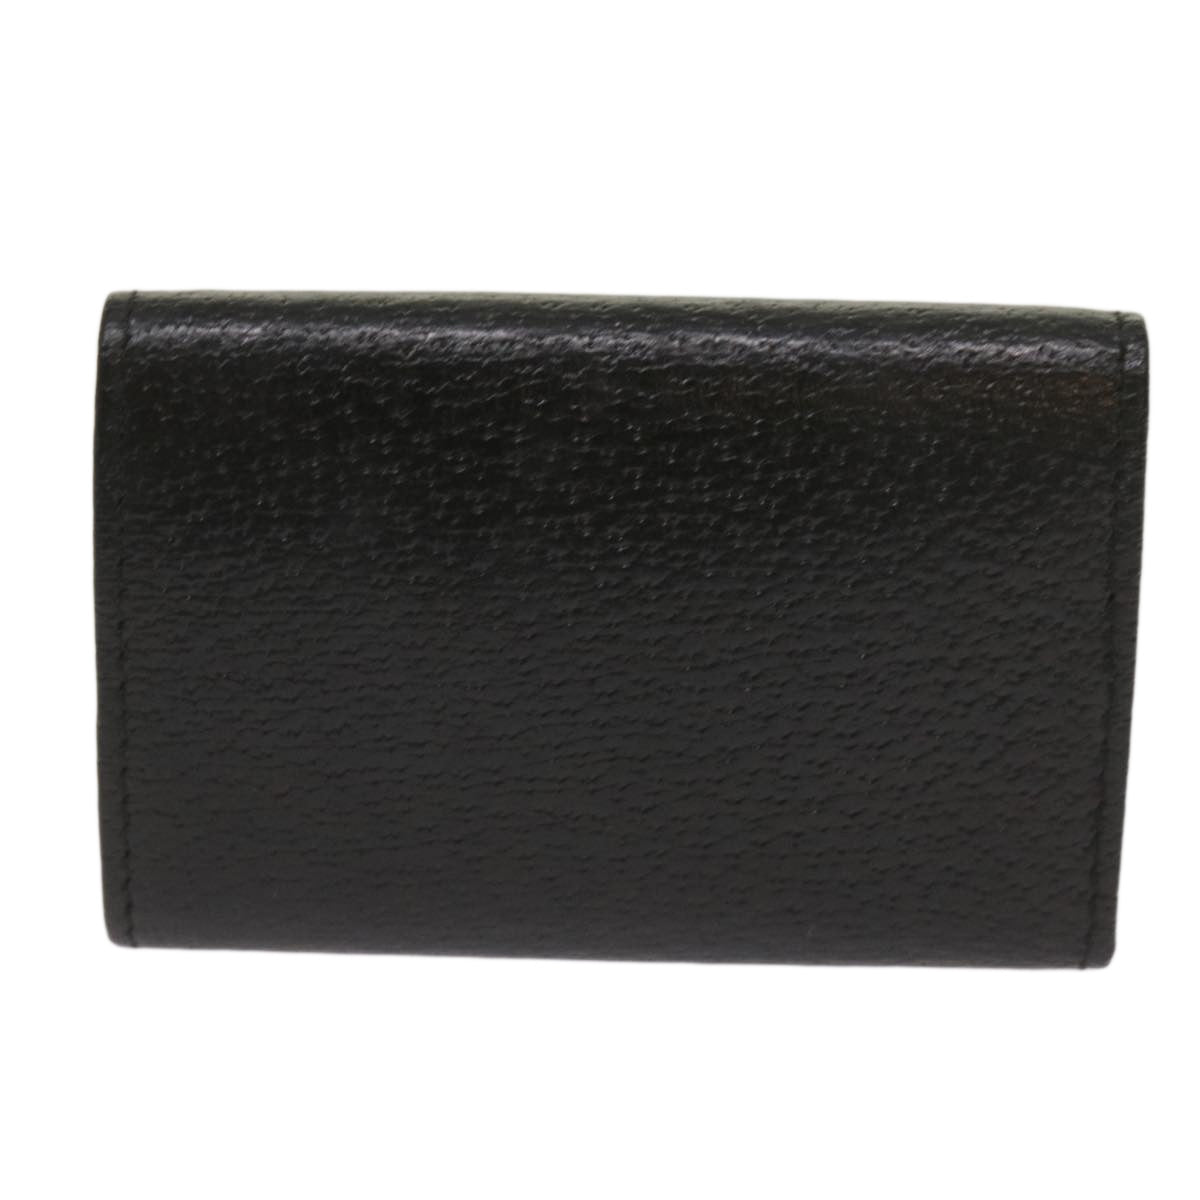 GUCCI Key Case Leather Black Auth bs11936